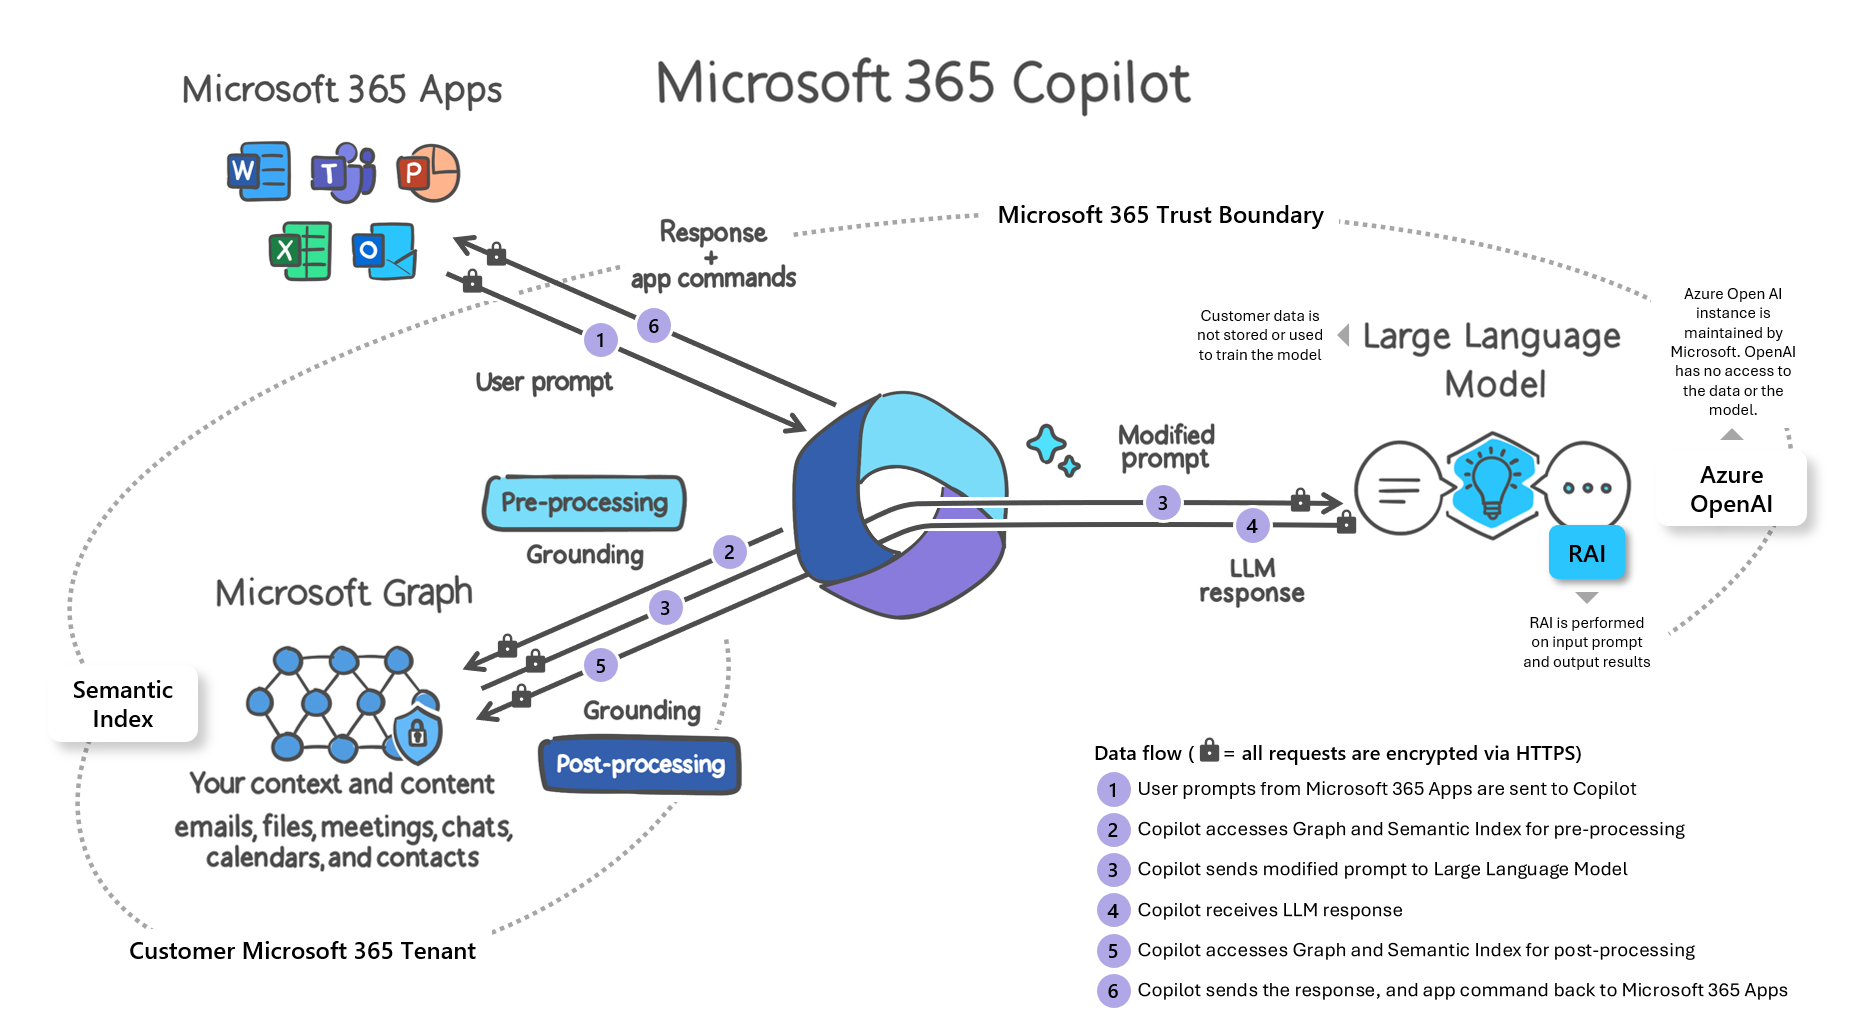 Microsoft 365 Copilotのアーキテクチャー図 出典:Data, Privacy, and Security for Microsoft Copilot for Microsoft 365 (Microsoft Learn)